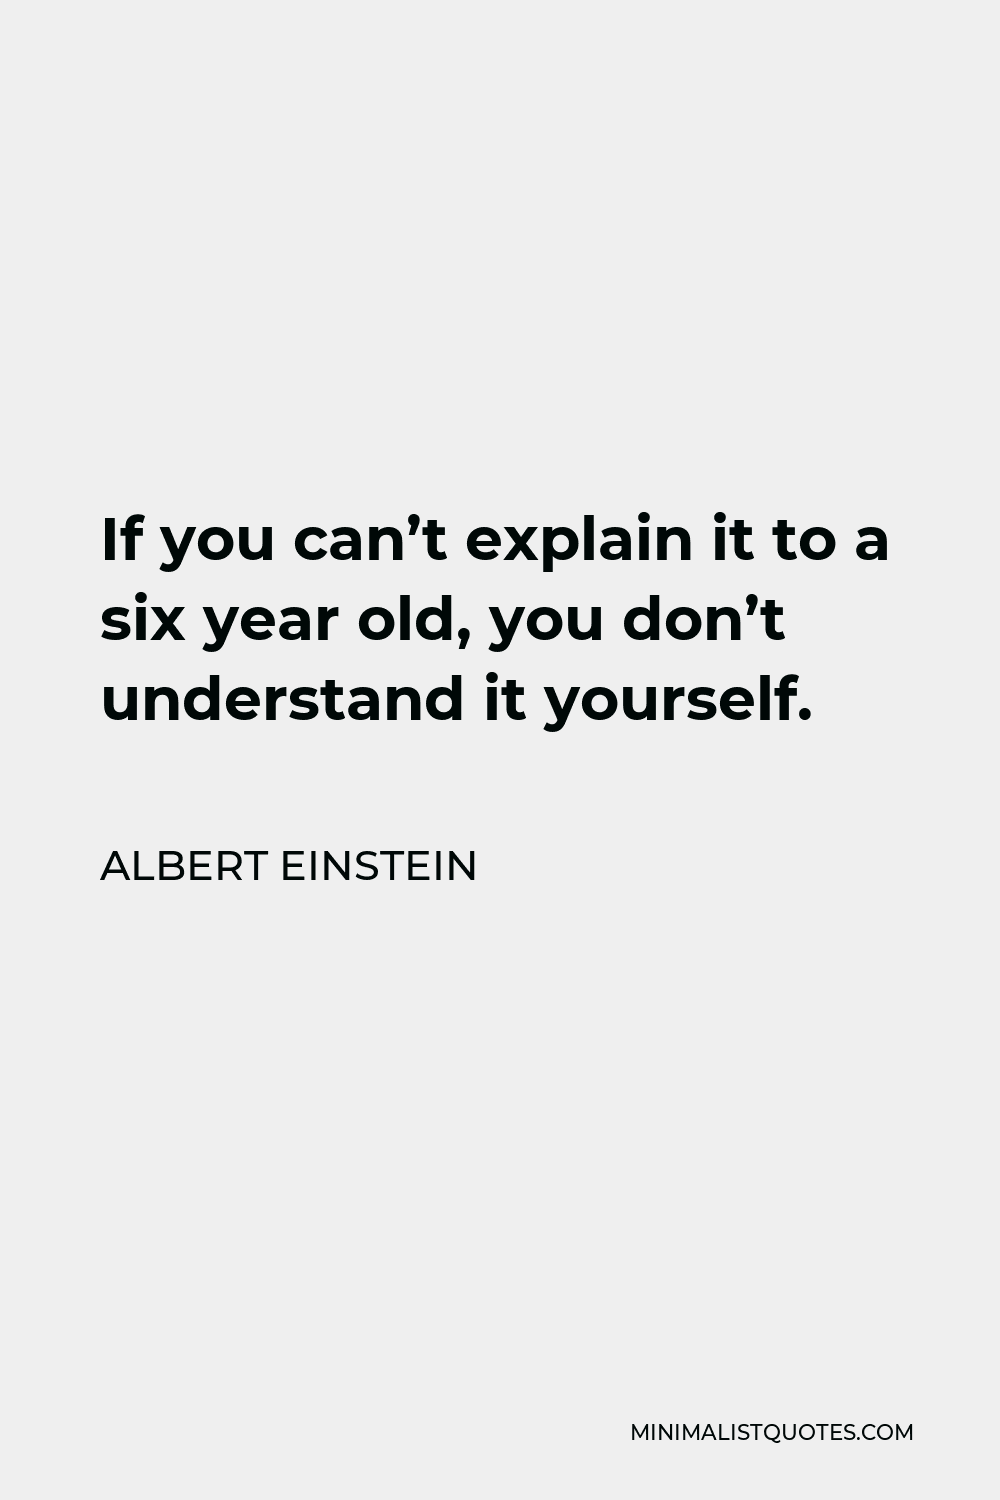 Albert Einstein Quote - If you can’t explain it to a six year old, you don’t understand it yourself.